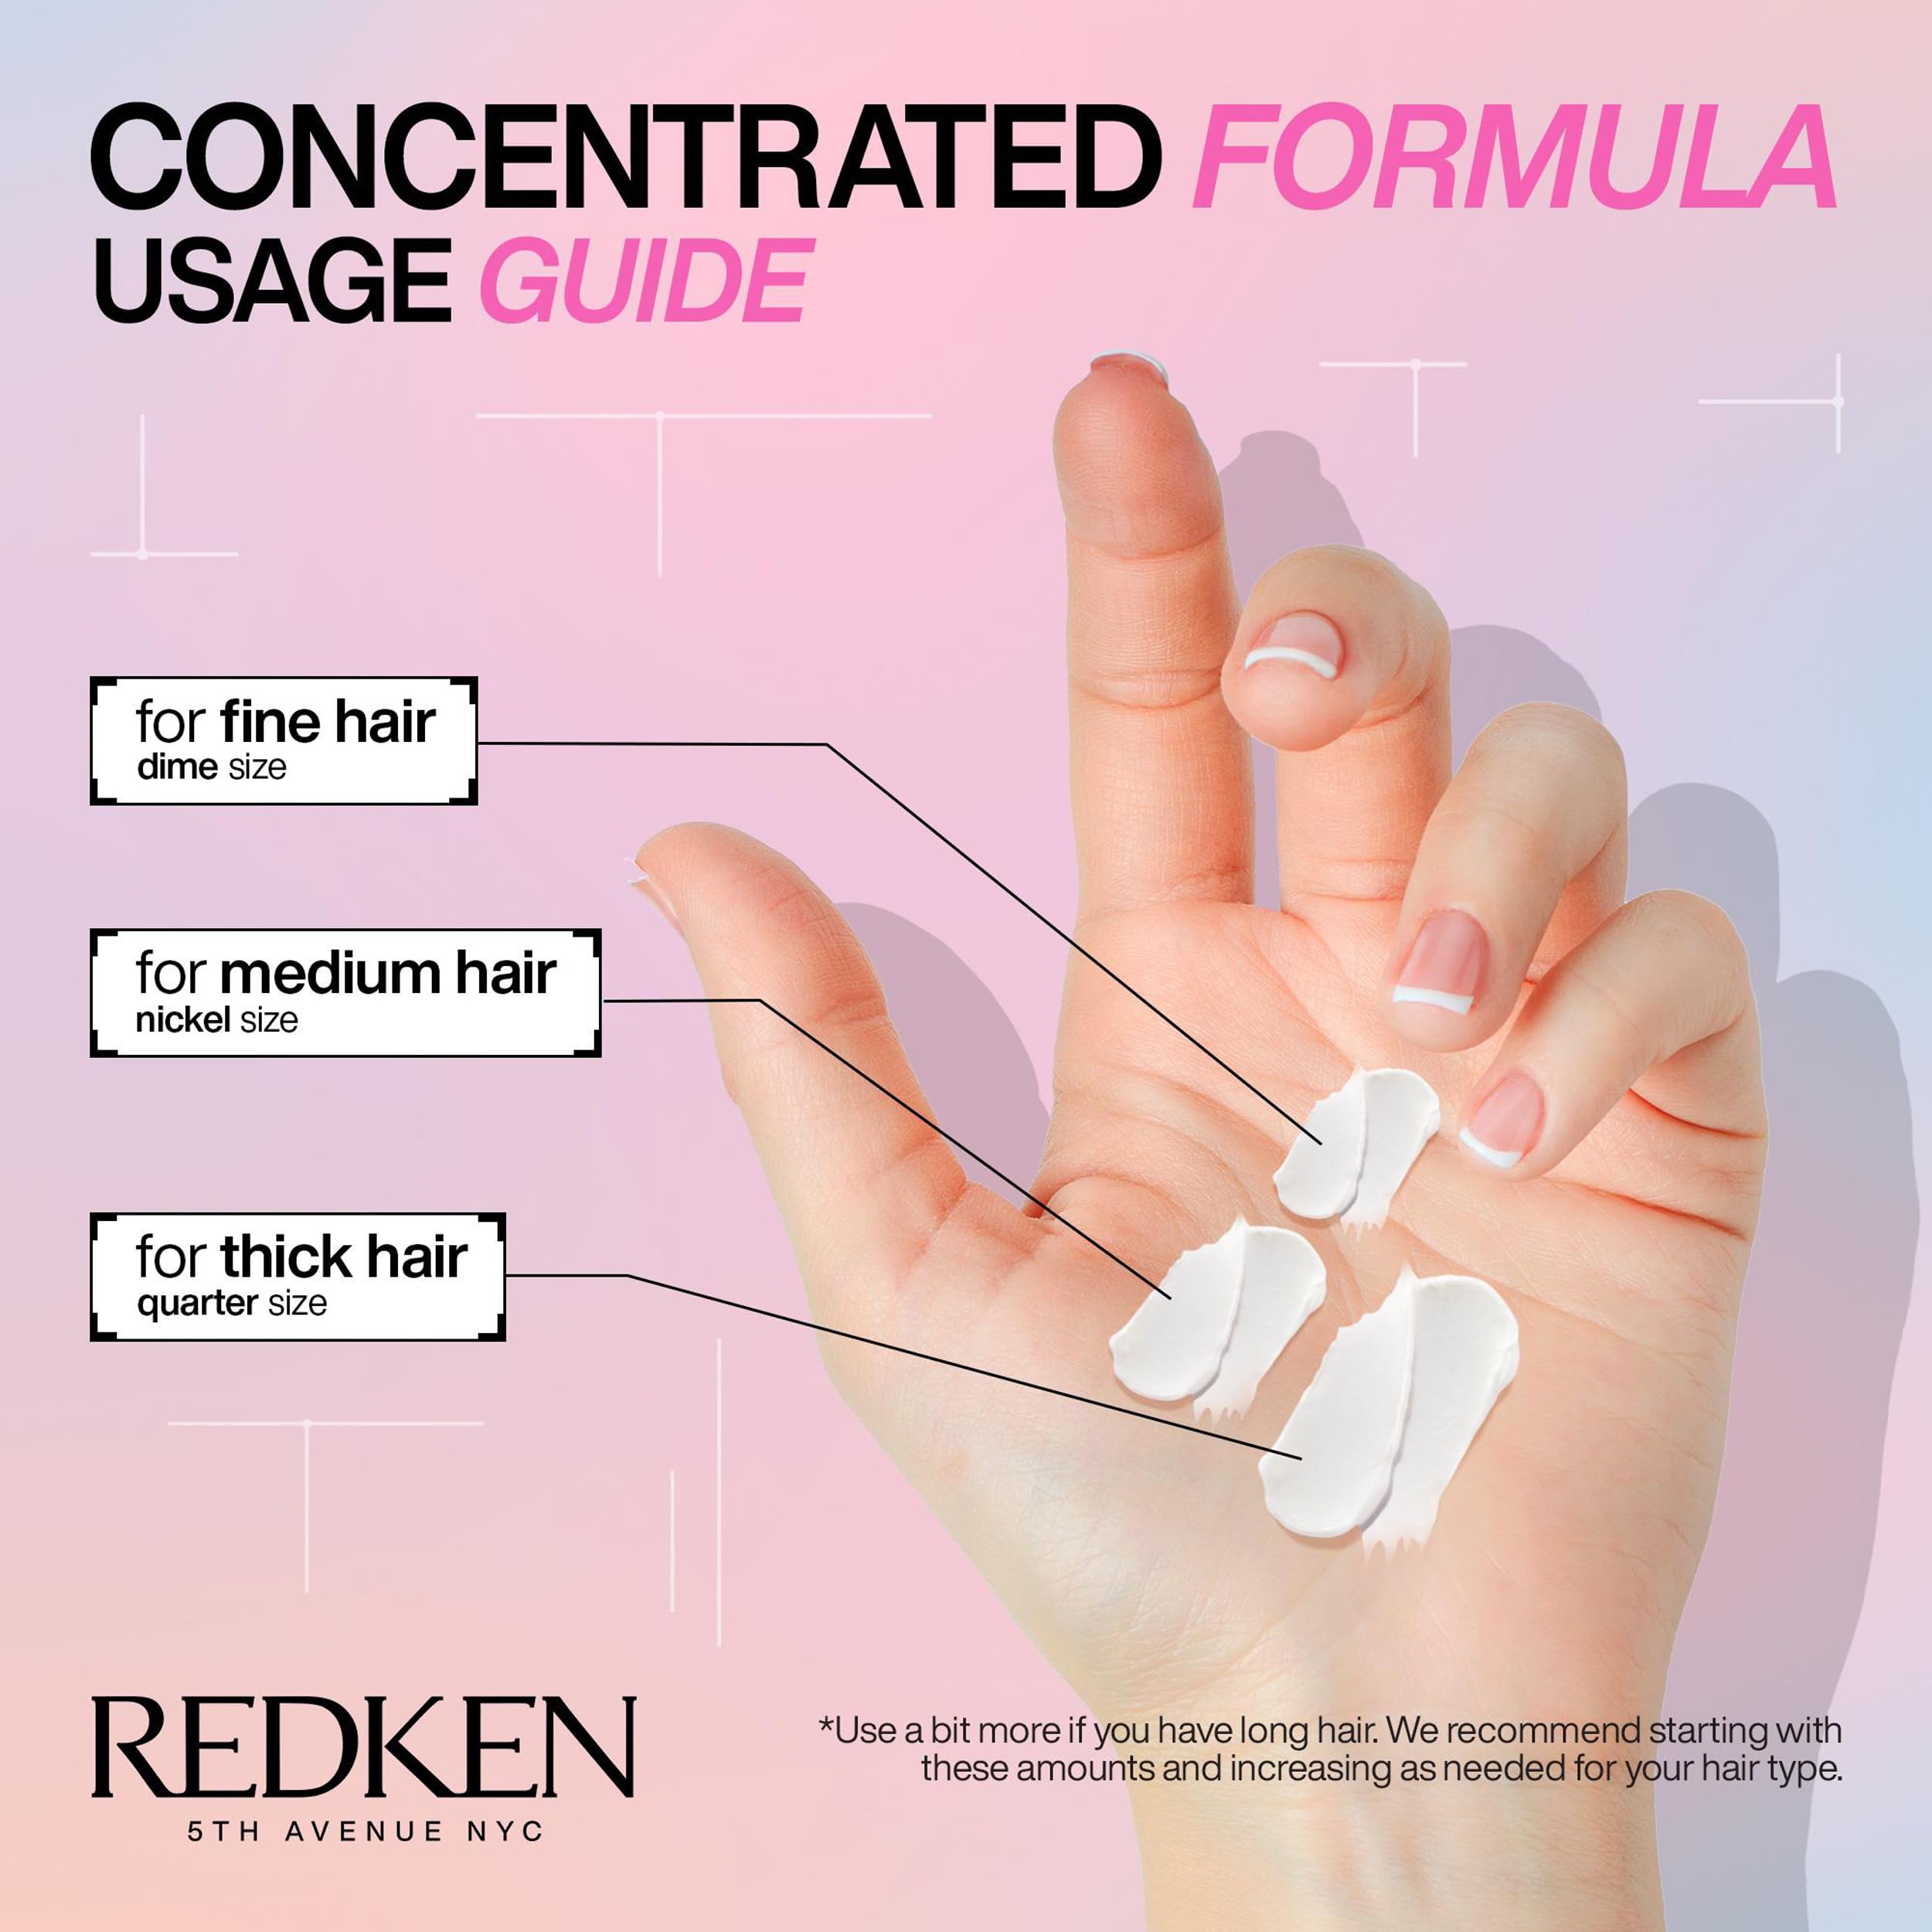 Redken Bonding Conditioner for Damaged Hair Repair | Strengthens and Repairs Weak and Brittle Hair | Acidic Bonding Concentrate | Safe for Color-Treated Hair | For All Hair Types